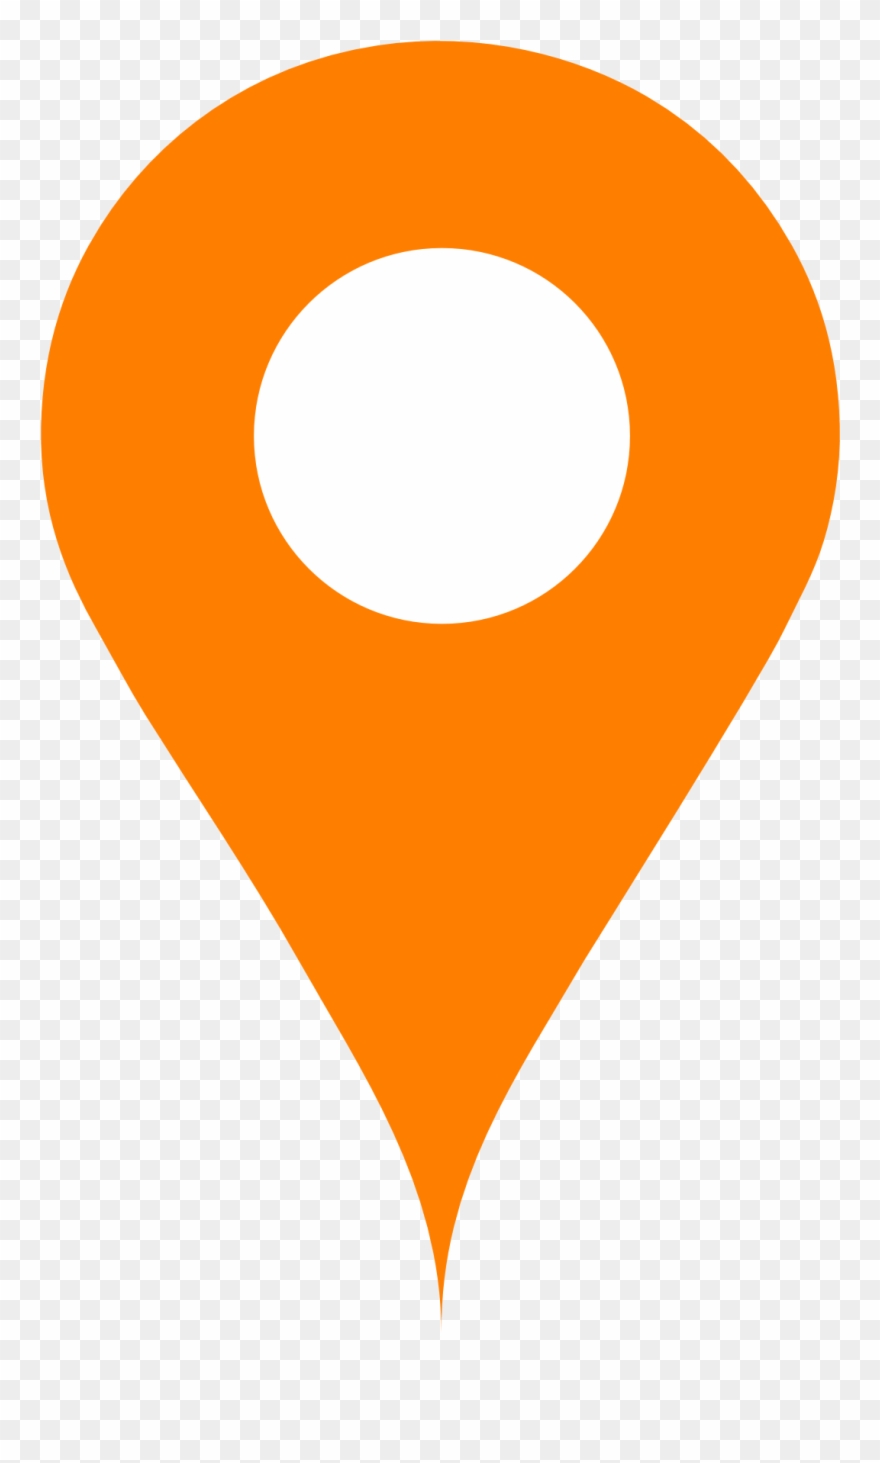 Location clipart orange. Map pin icon png